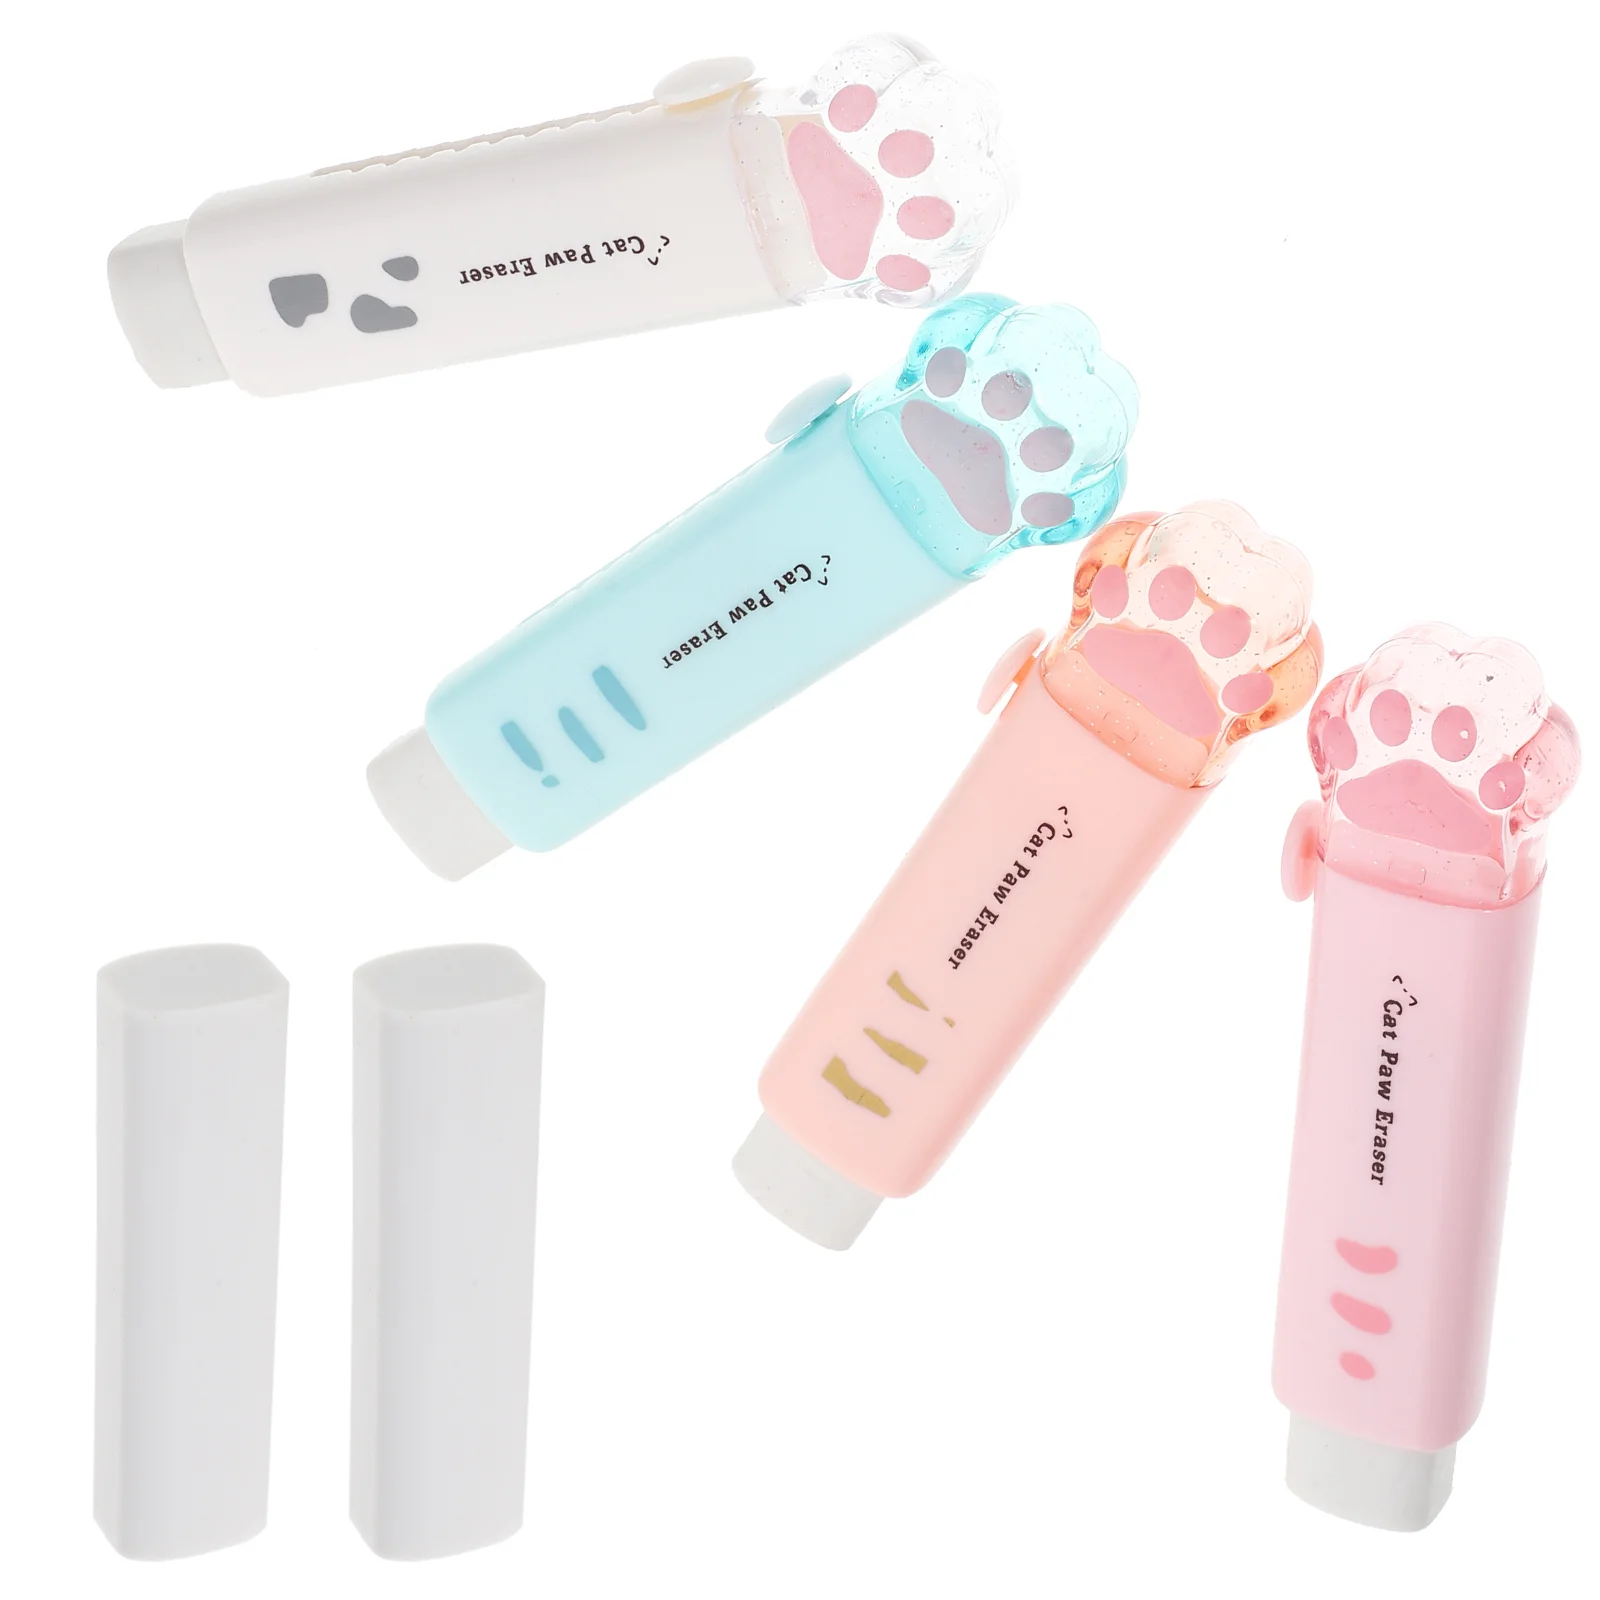 

Eraser Cat Paw Shaped Erasers Portable Refill Exam Test Rubber Kawaii School Supplies Student Students